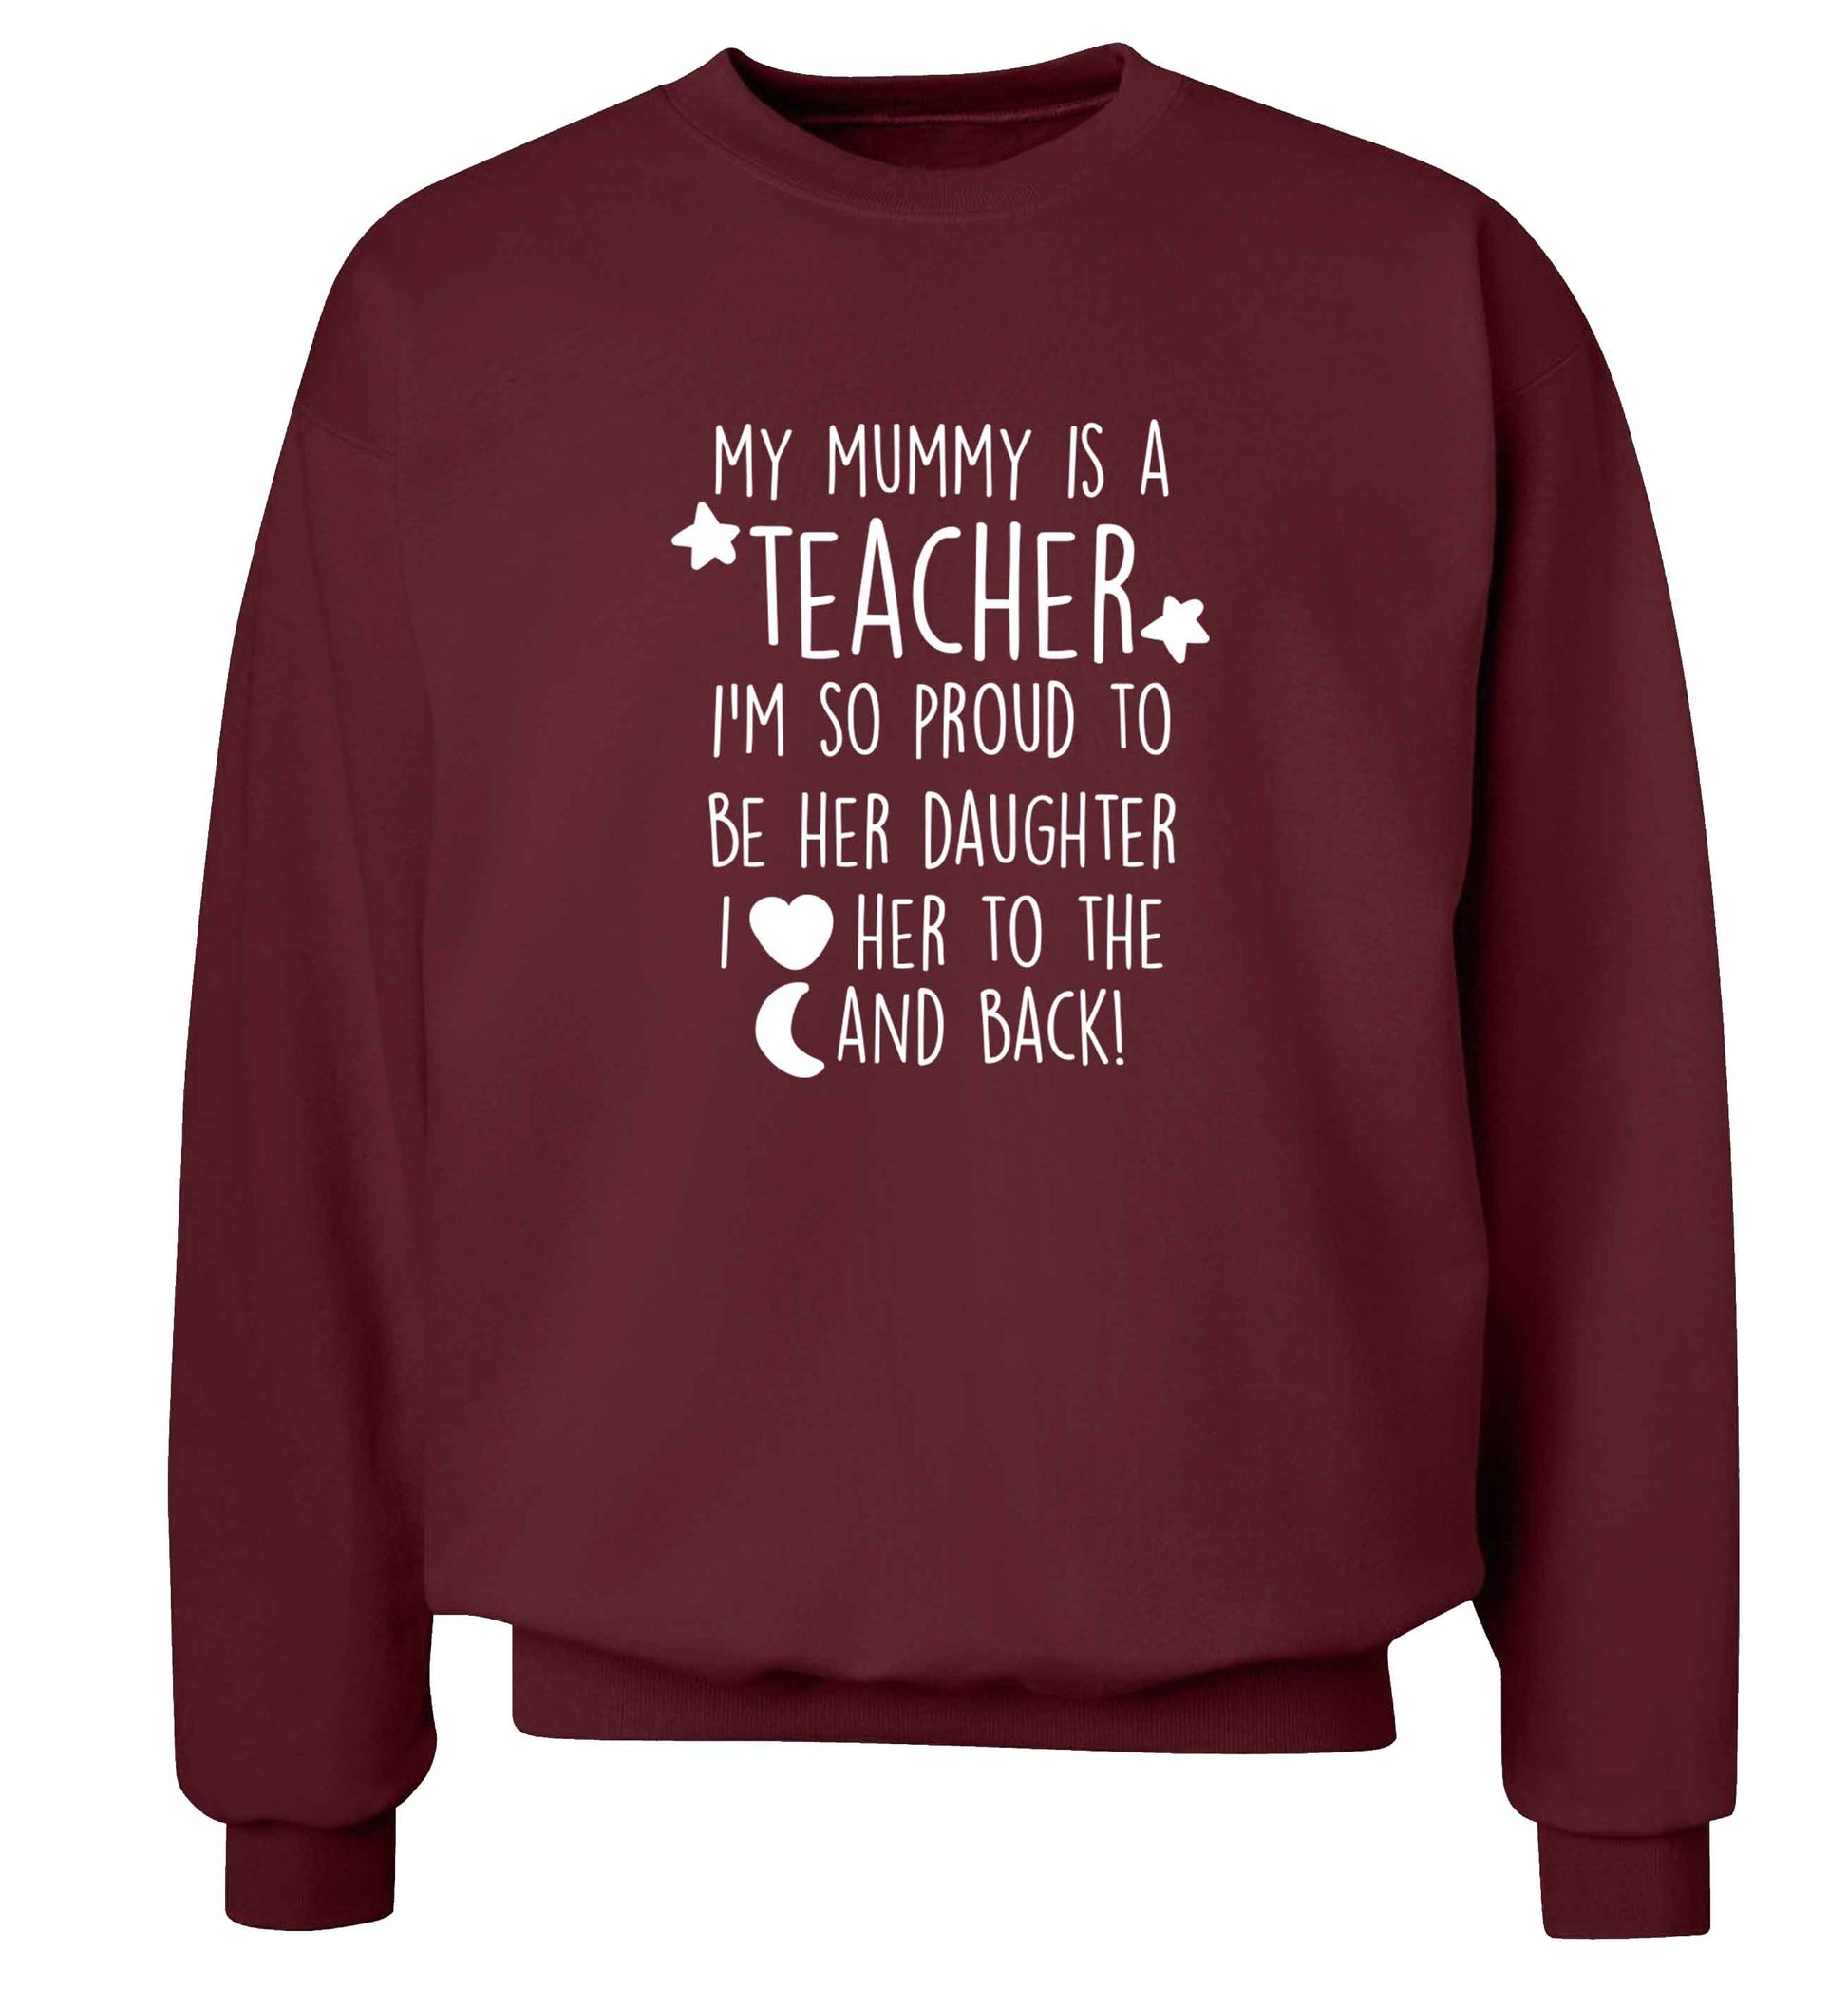 My mummy is a teacher I'm so proud to be her daughter I love her to the moon and back adult's unisex maroon sweater 2XL